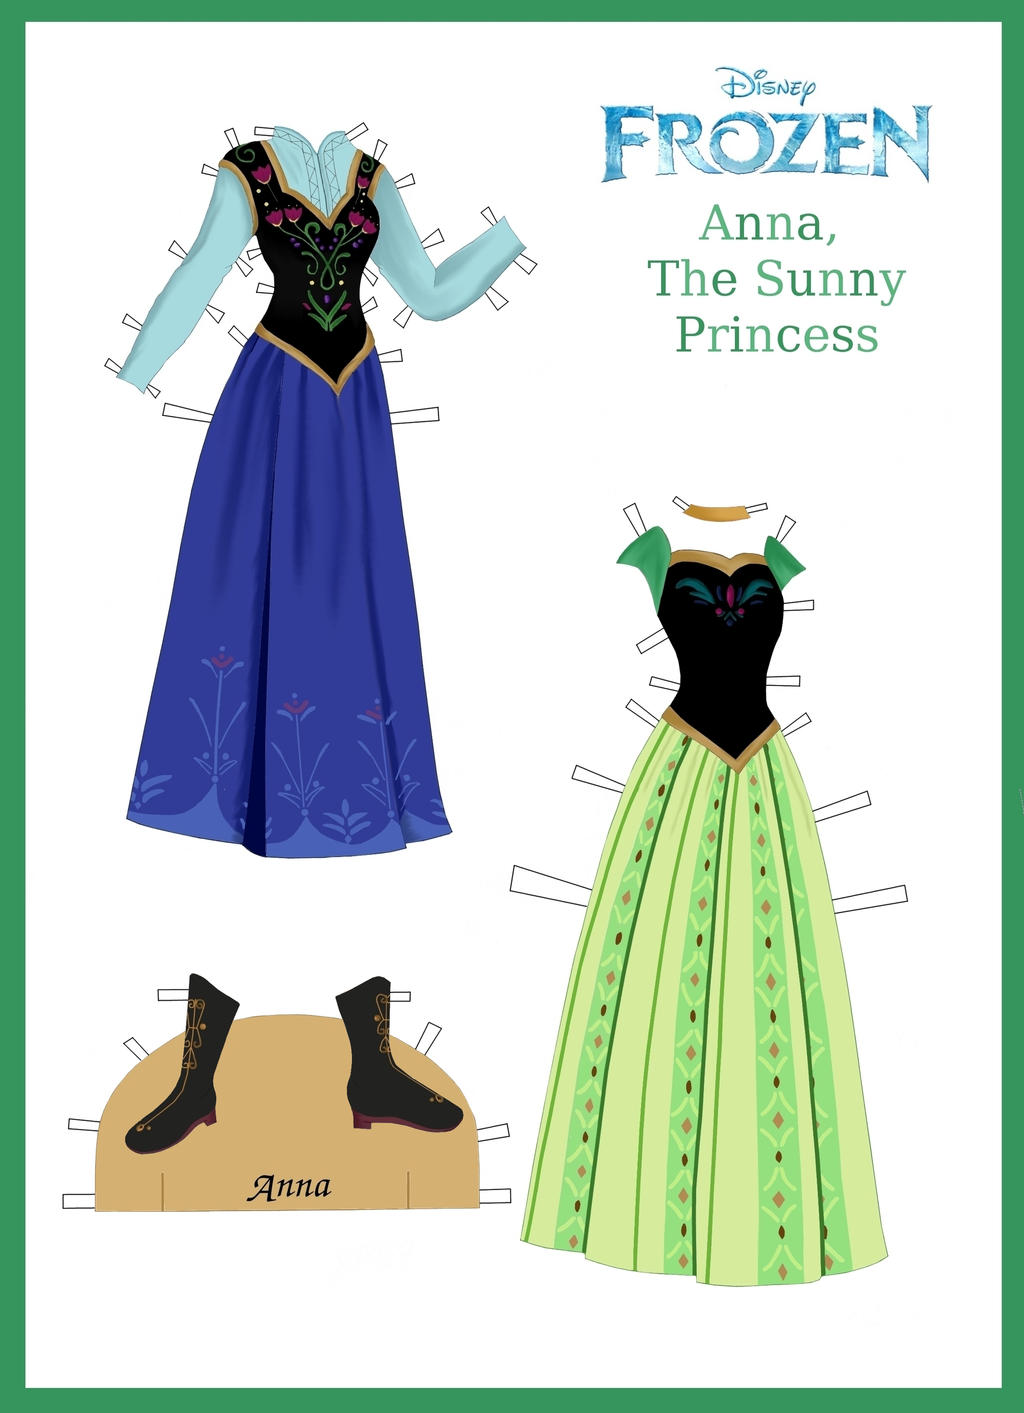 Disney's Frozen Paper Dolls: Anna's Outfits by evelynmckay on DeviantArt